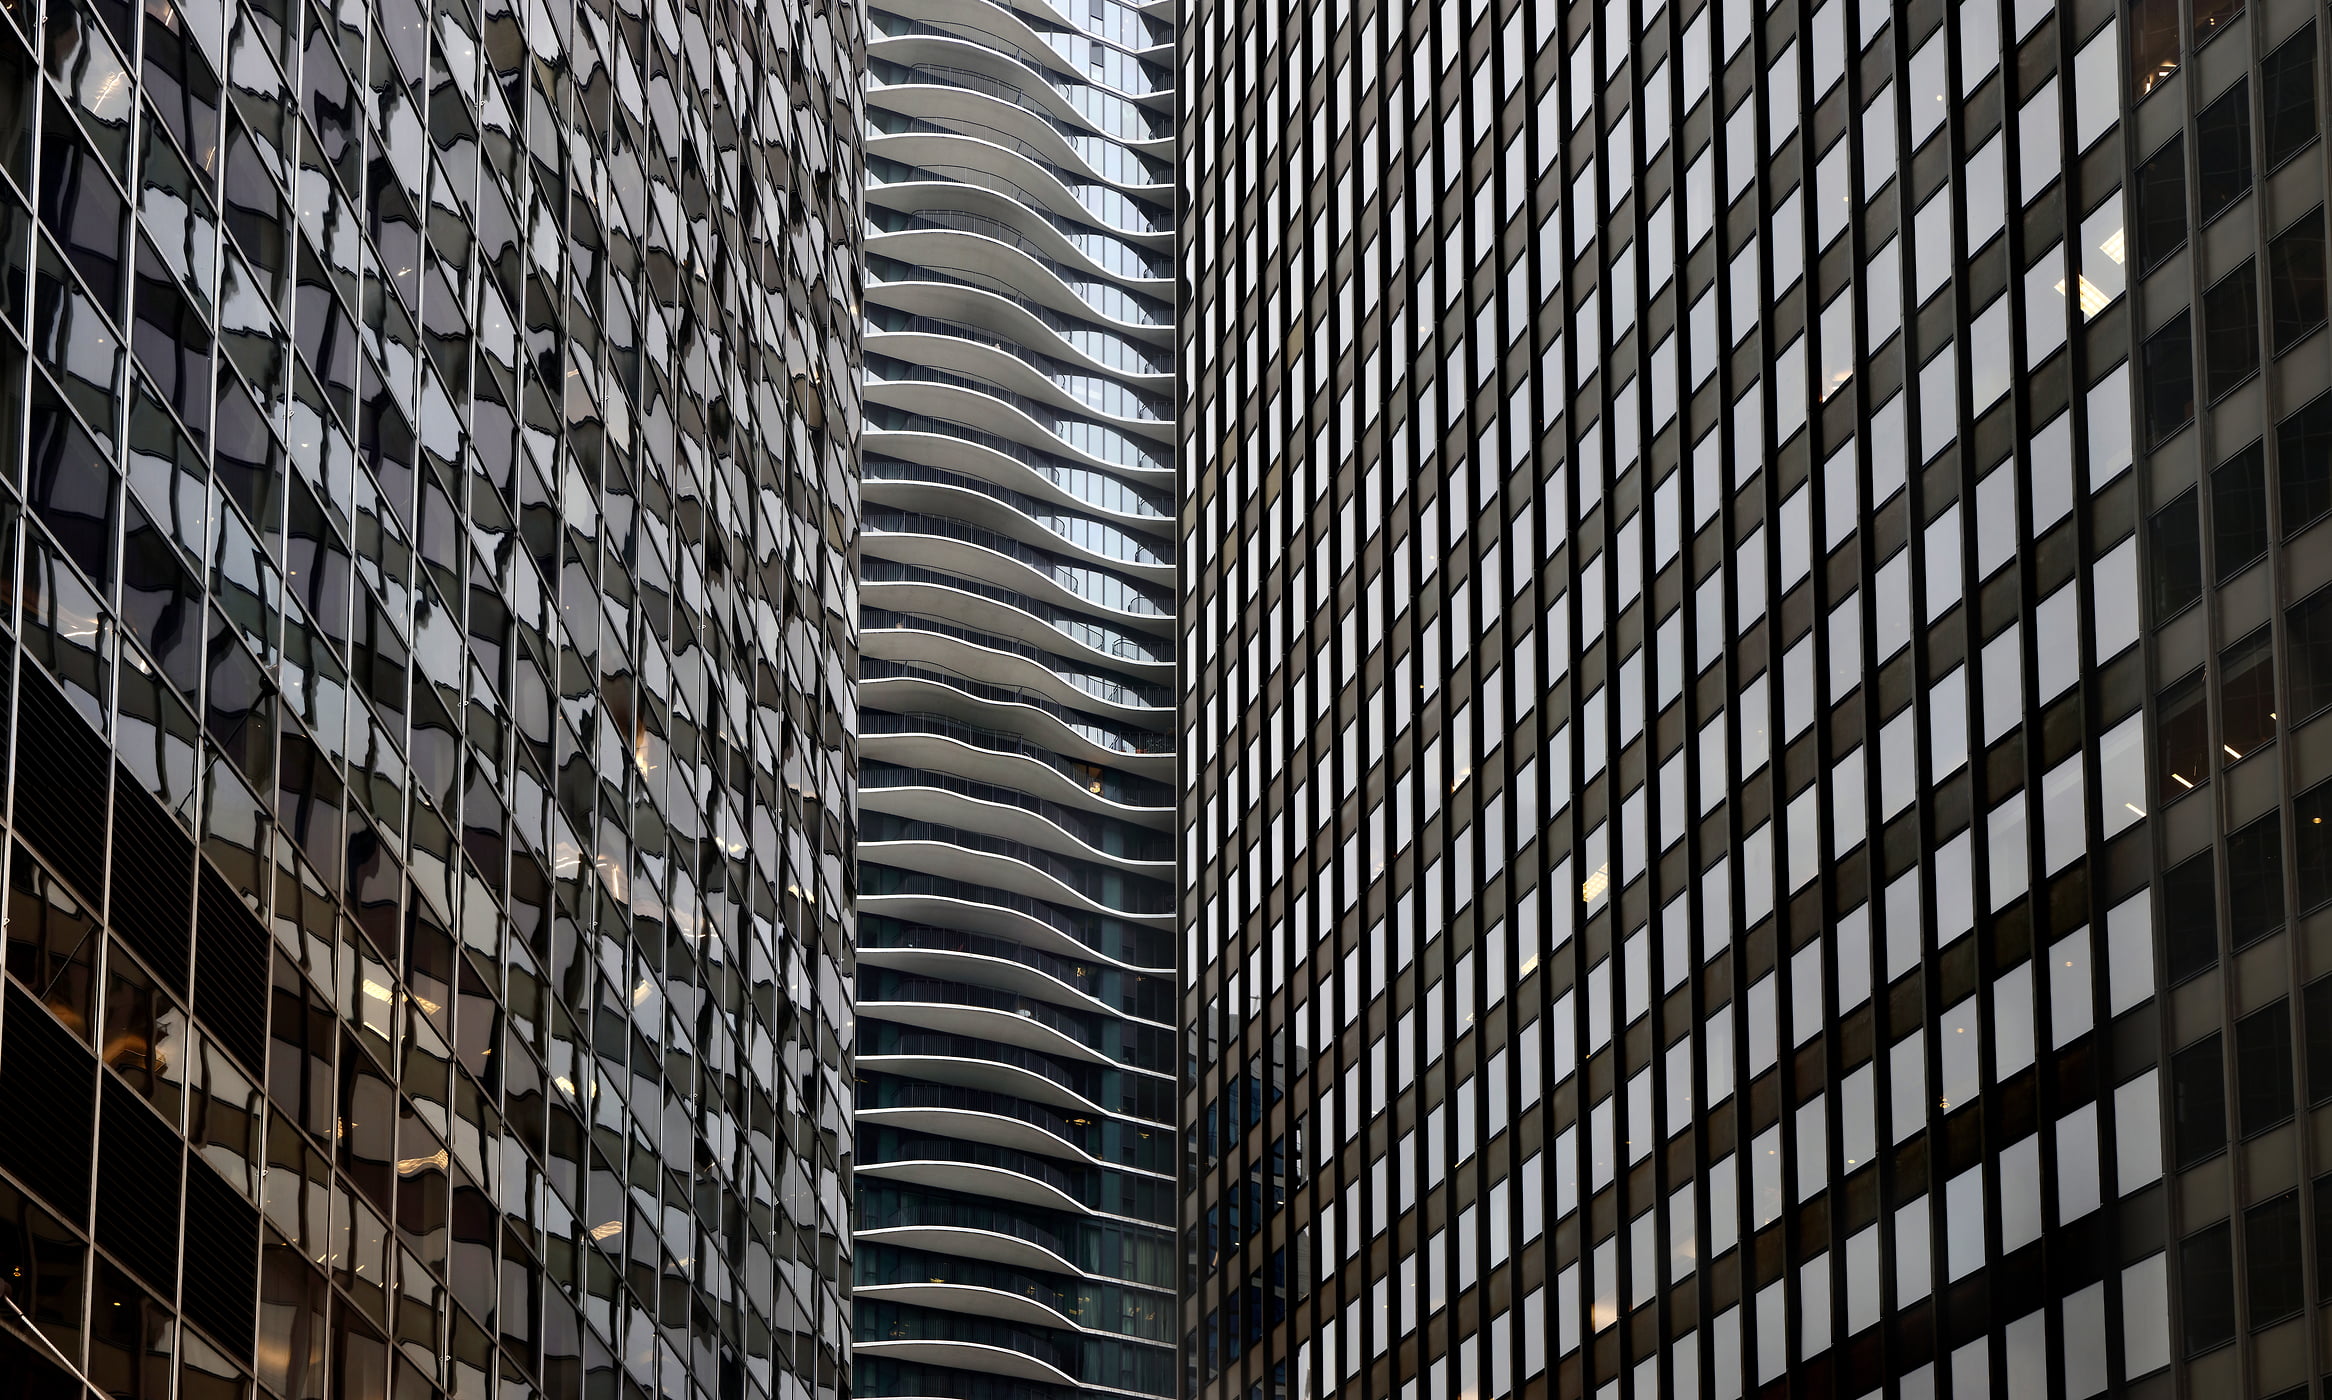 274 megapixels! A very high resolution, large-format VAST photo print of an urban pattern of repeating floors of buildings with balconies; photograph created by Phil Crawshay in Chicago, Illinois.